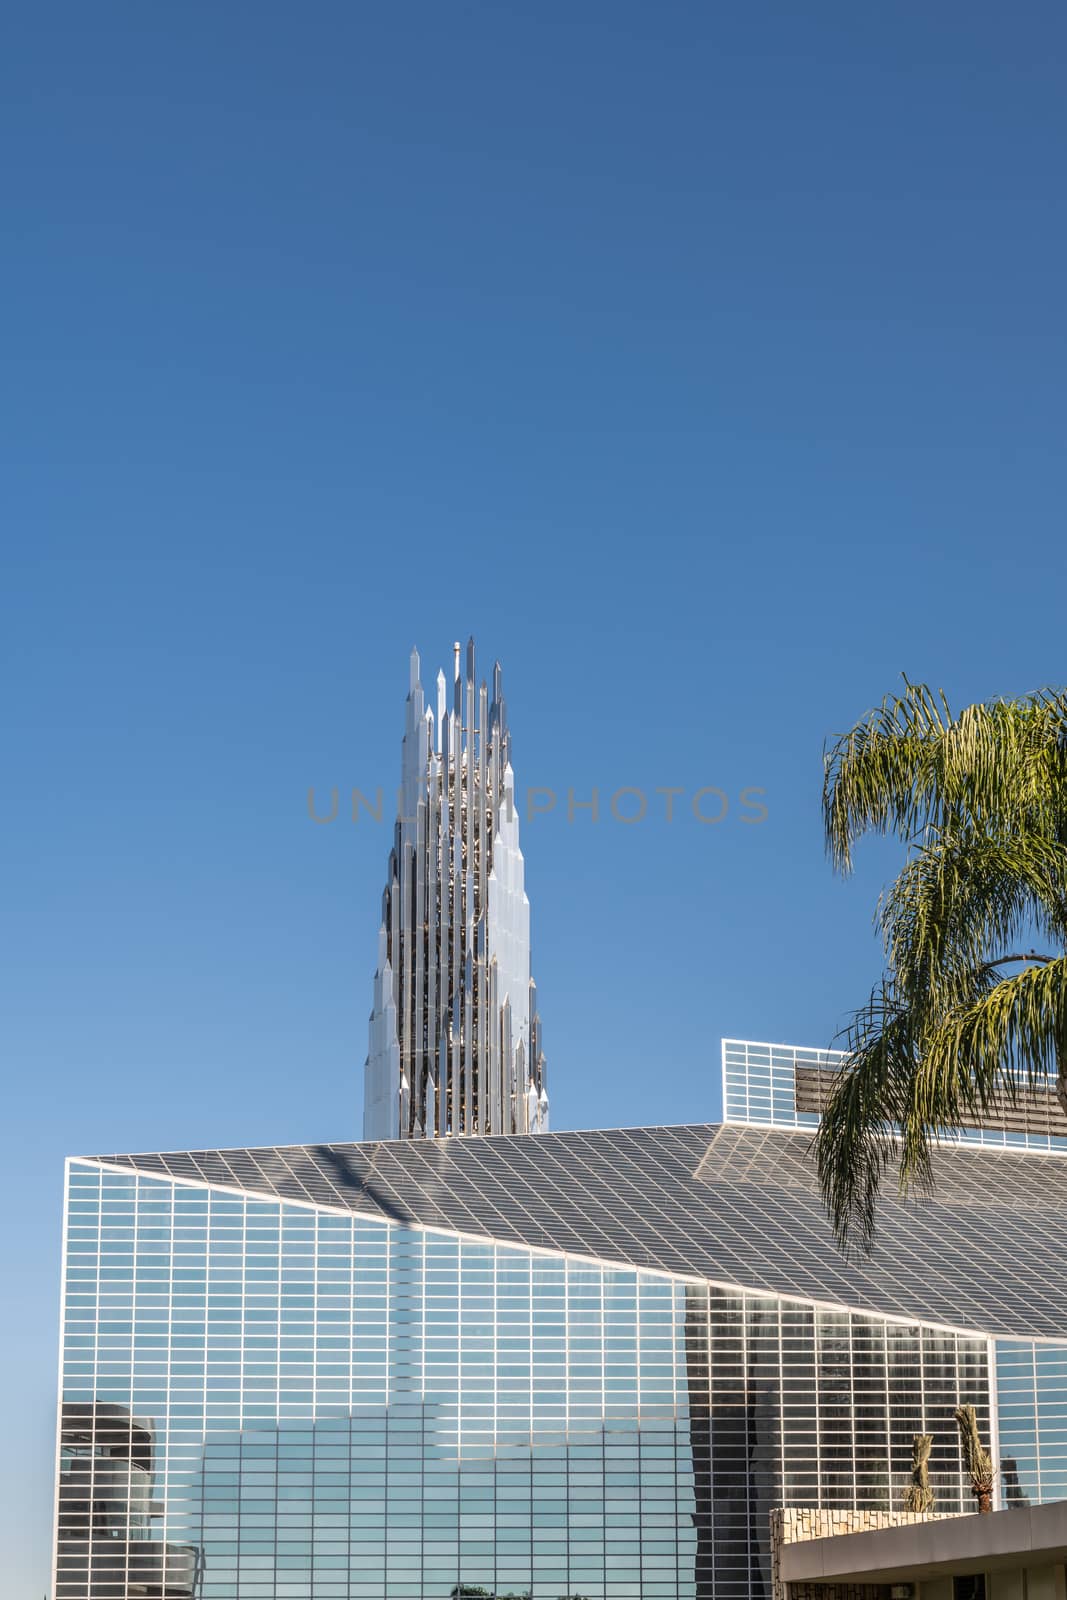 Christ Cathedral and crystal Crean Tower in Garden Grove, Califo by Claudine